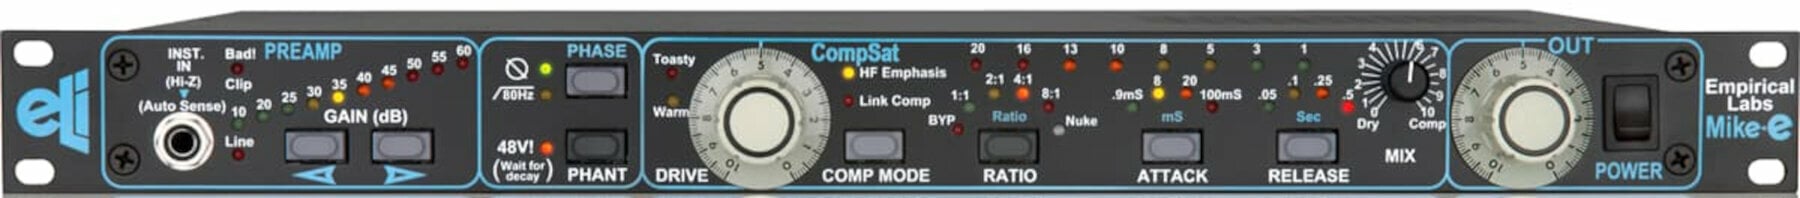 Microphone Preamp Empirical Labs Mike-e Model EL-9 Microphone Preamp